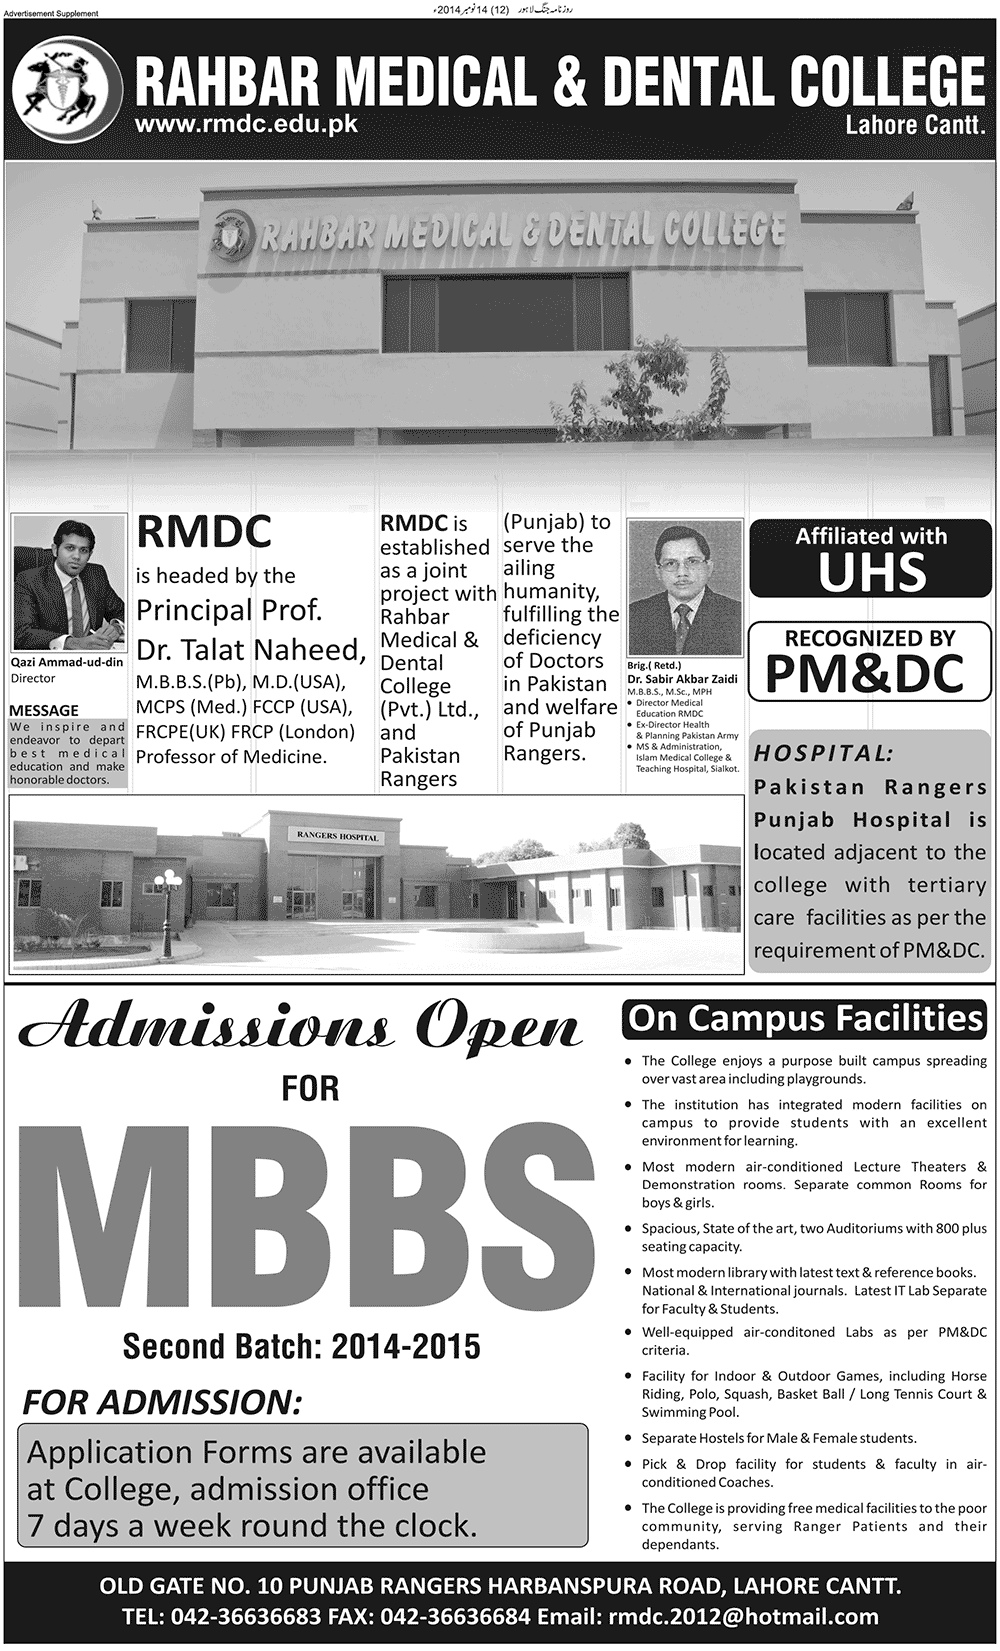 Rahbar Medical College Lahore Mbbs Admissions 2014 Form, Last Date